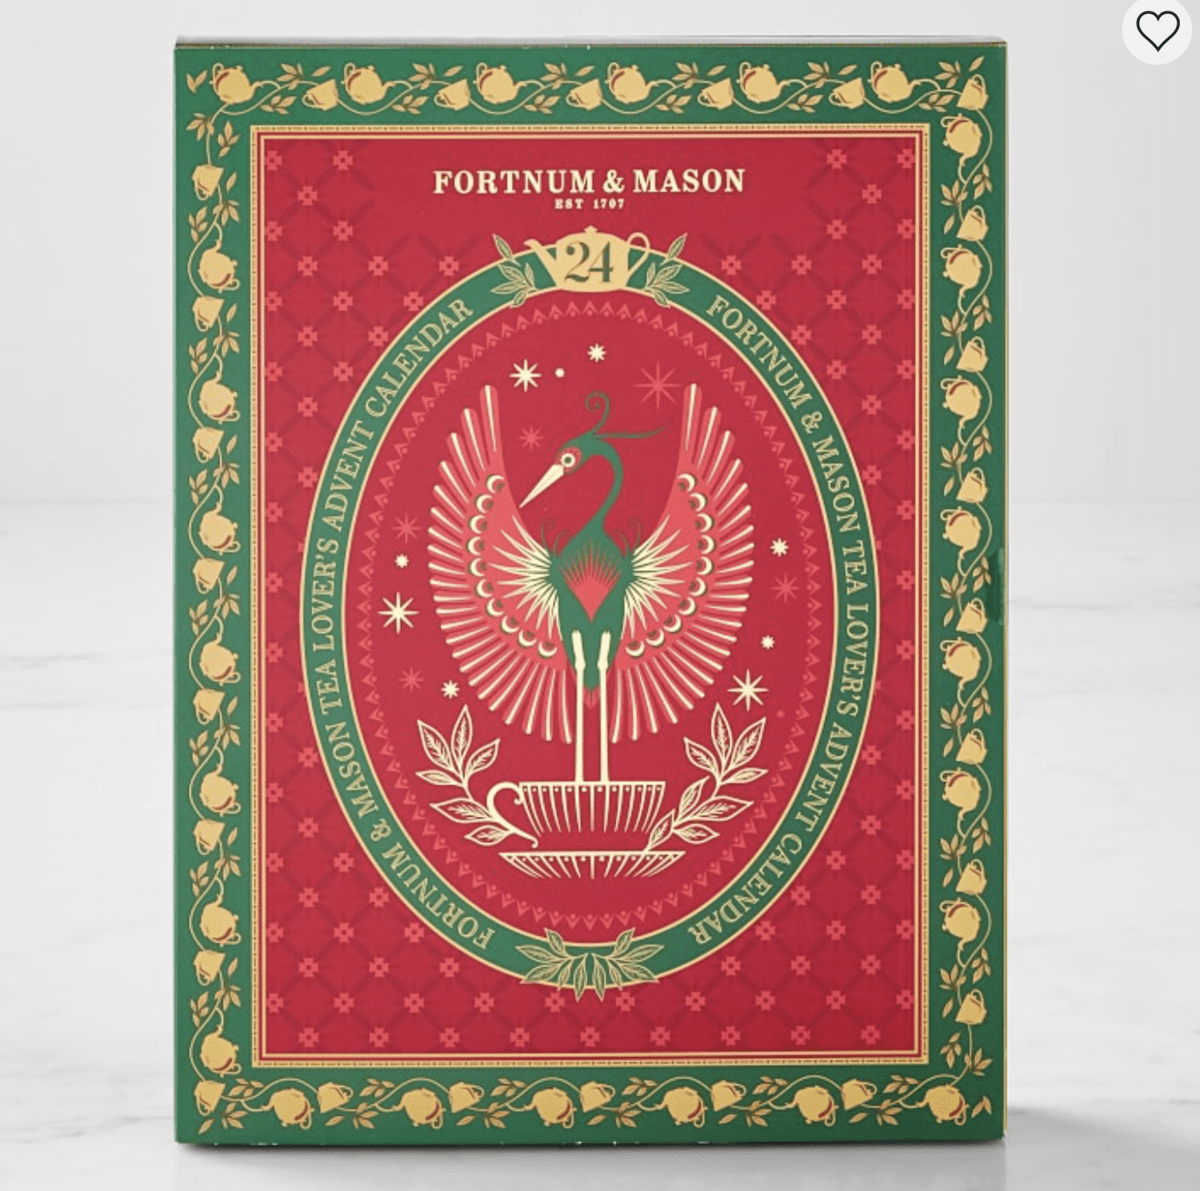 Read more about the article Fortnum & Mason Tea Advent Calendar – On Sale Now + Full Spoilers!